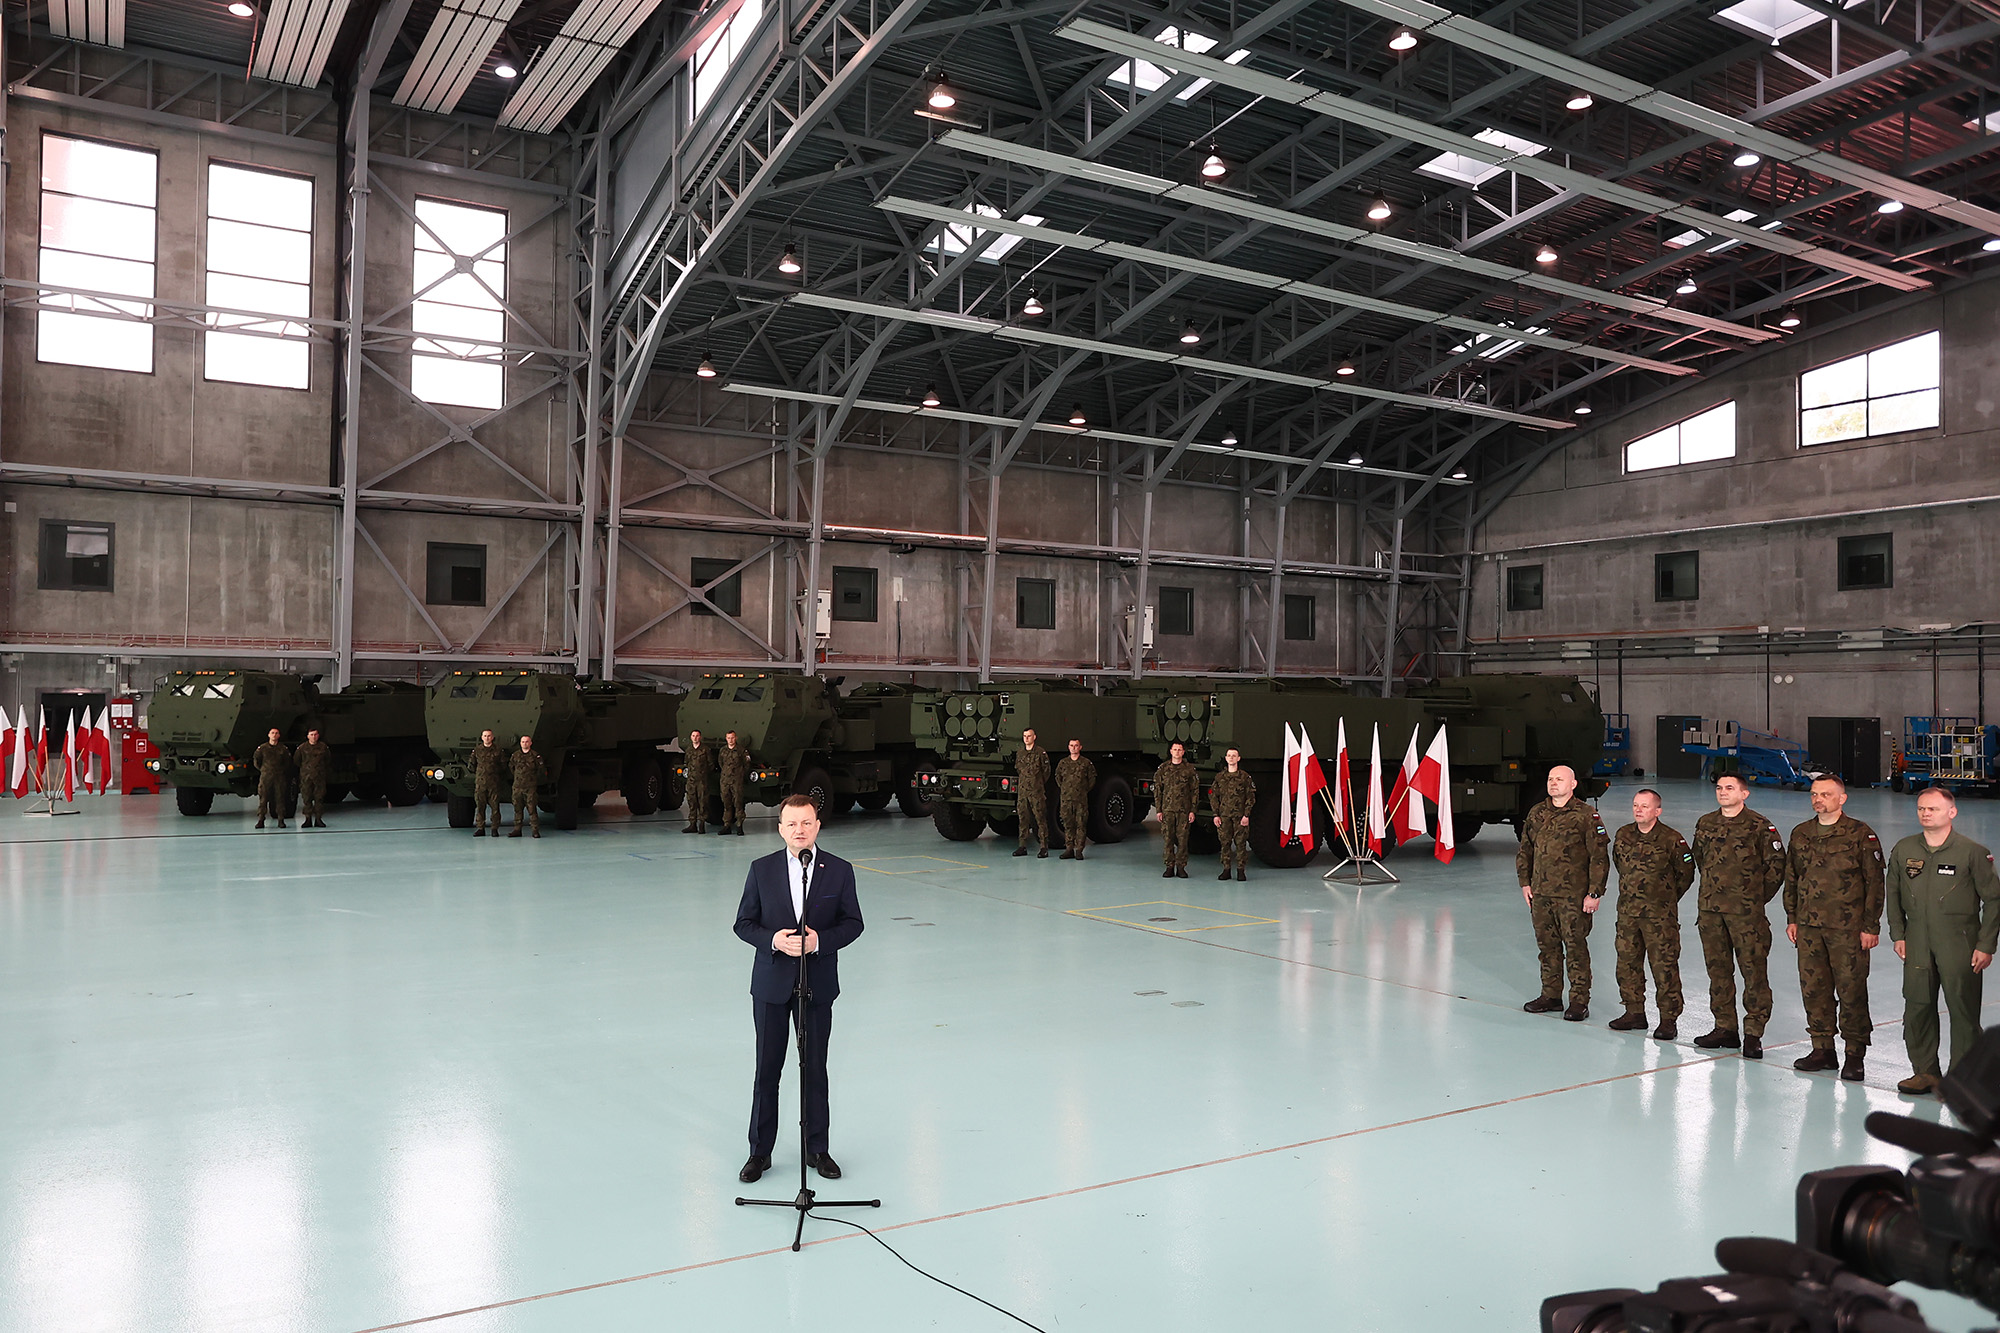 Poland's Deputy Prime Minister and Defense Minister Mariusz Blaszczak speaks during the presentation of the newly delivered M142 HIMARS rocket launch system in Warsaw, Poland on May 15.